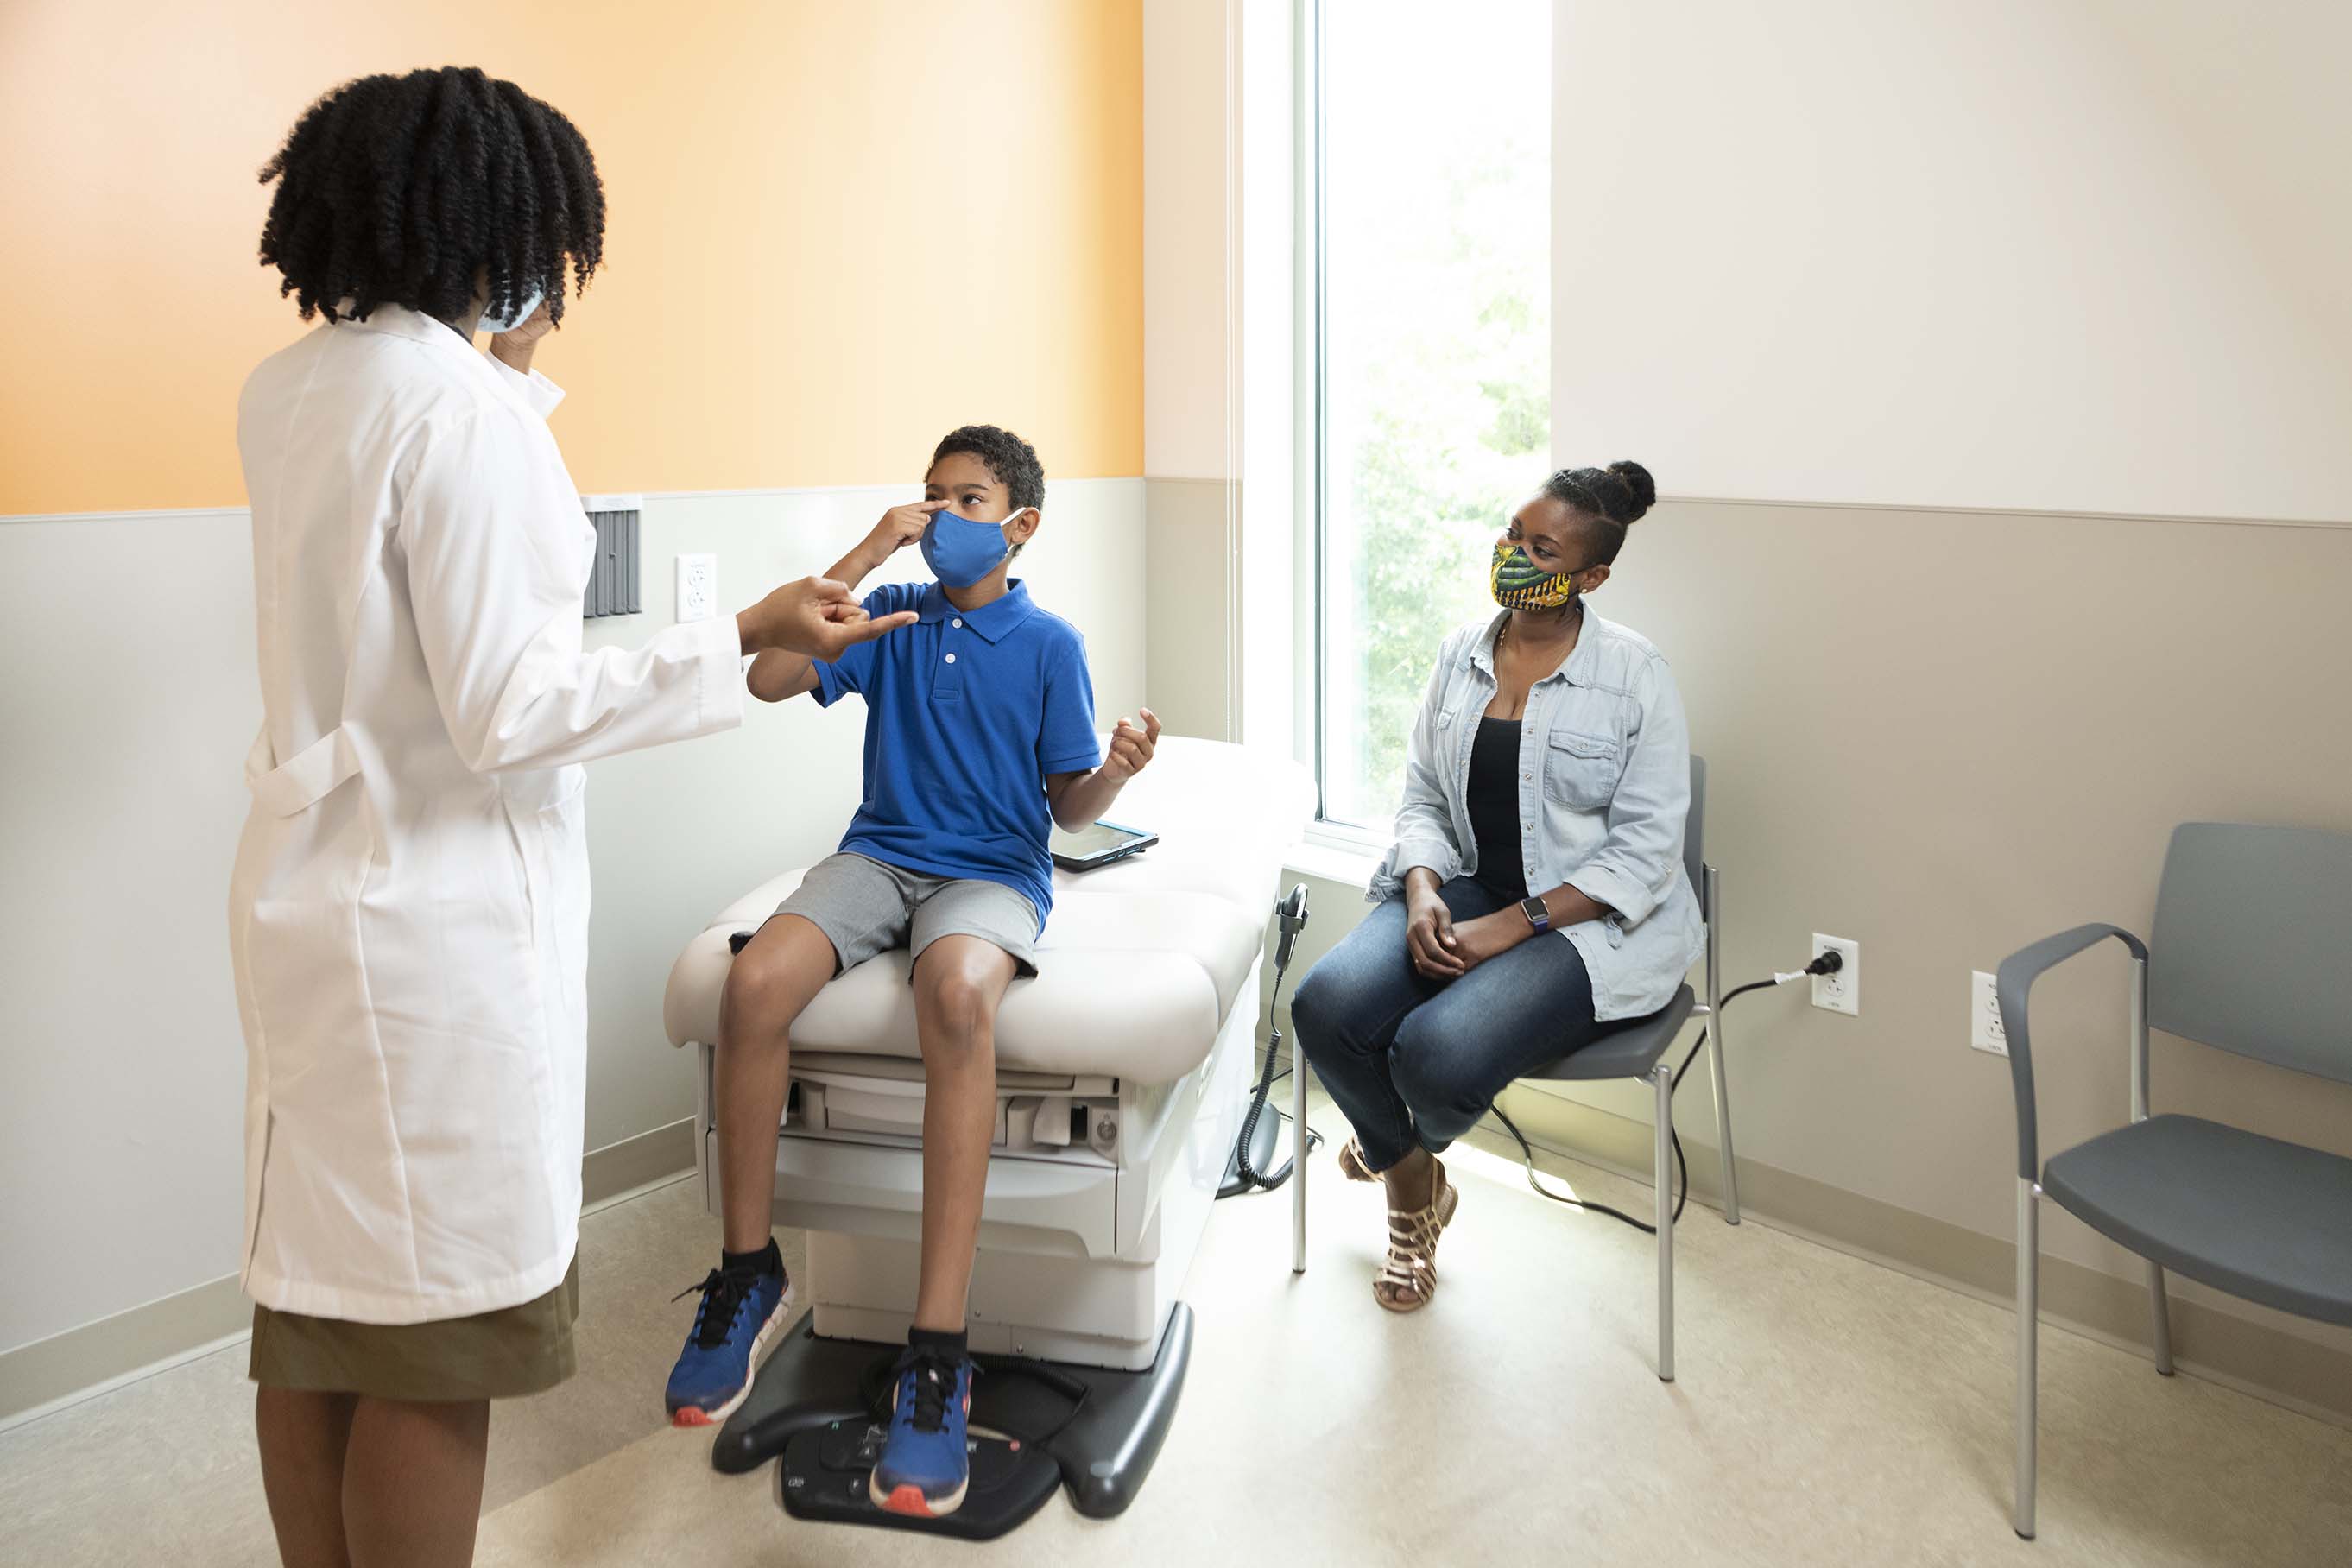 Young boy in pediatric exam room with doctor